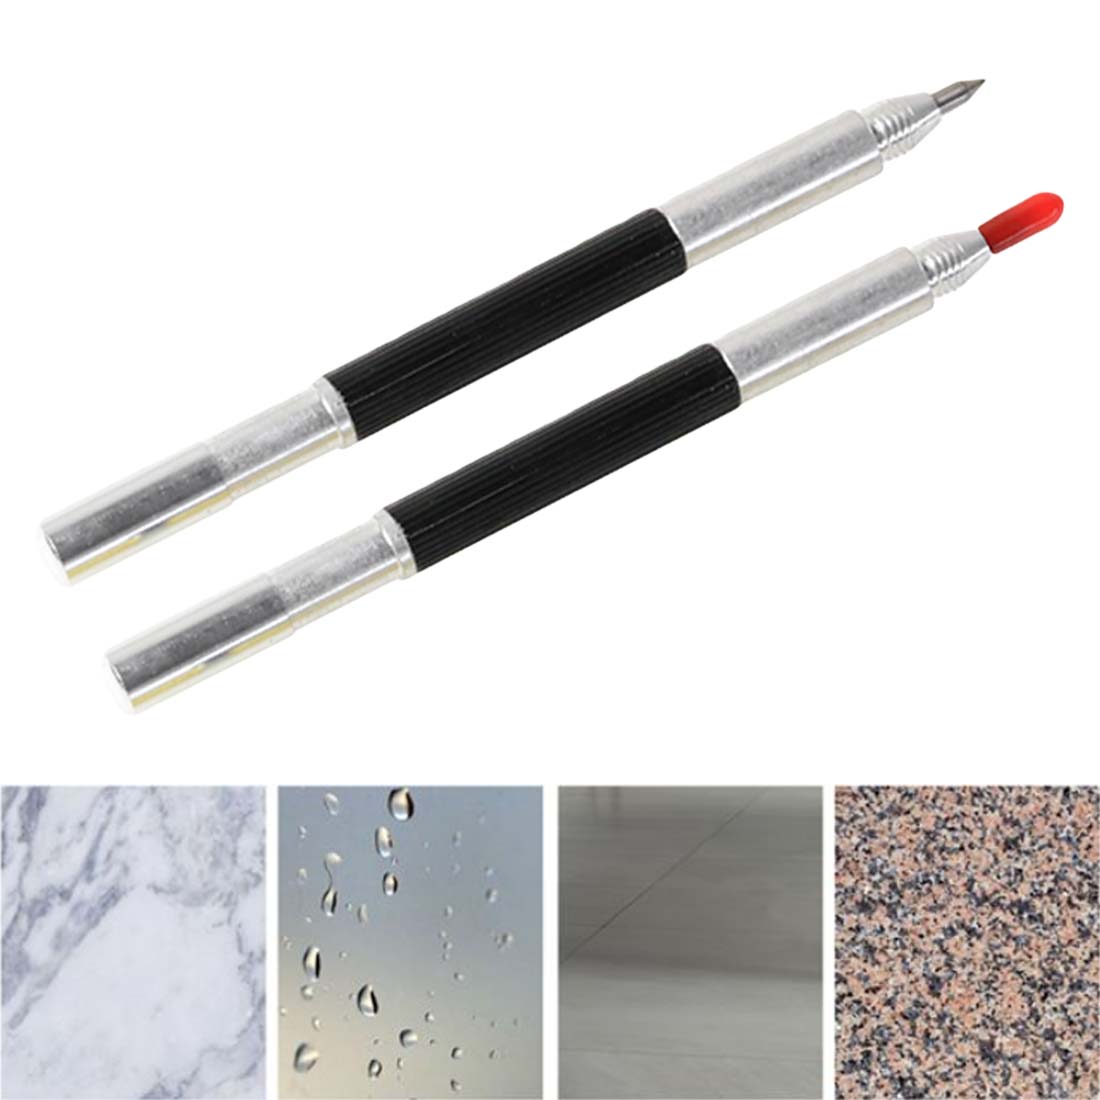 130mm Glass Ceramic Marker Double Headed Glass Tile Cutter Construction Tool Parts Machine Pen Glass knife Scriber